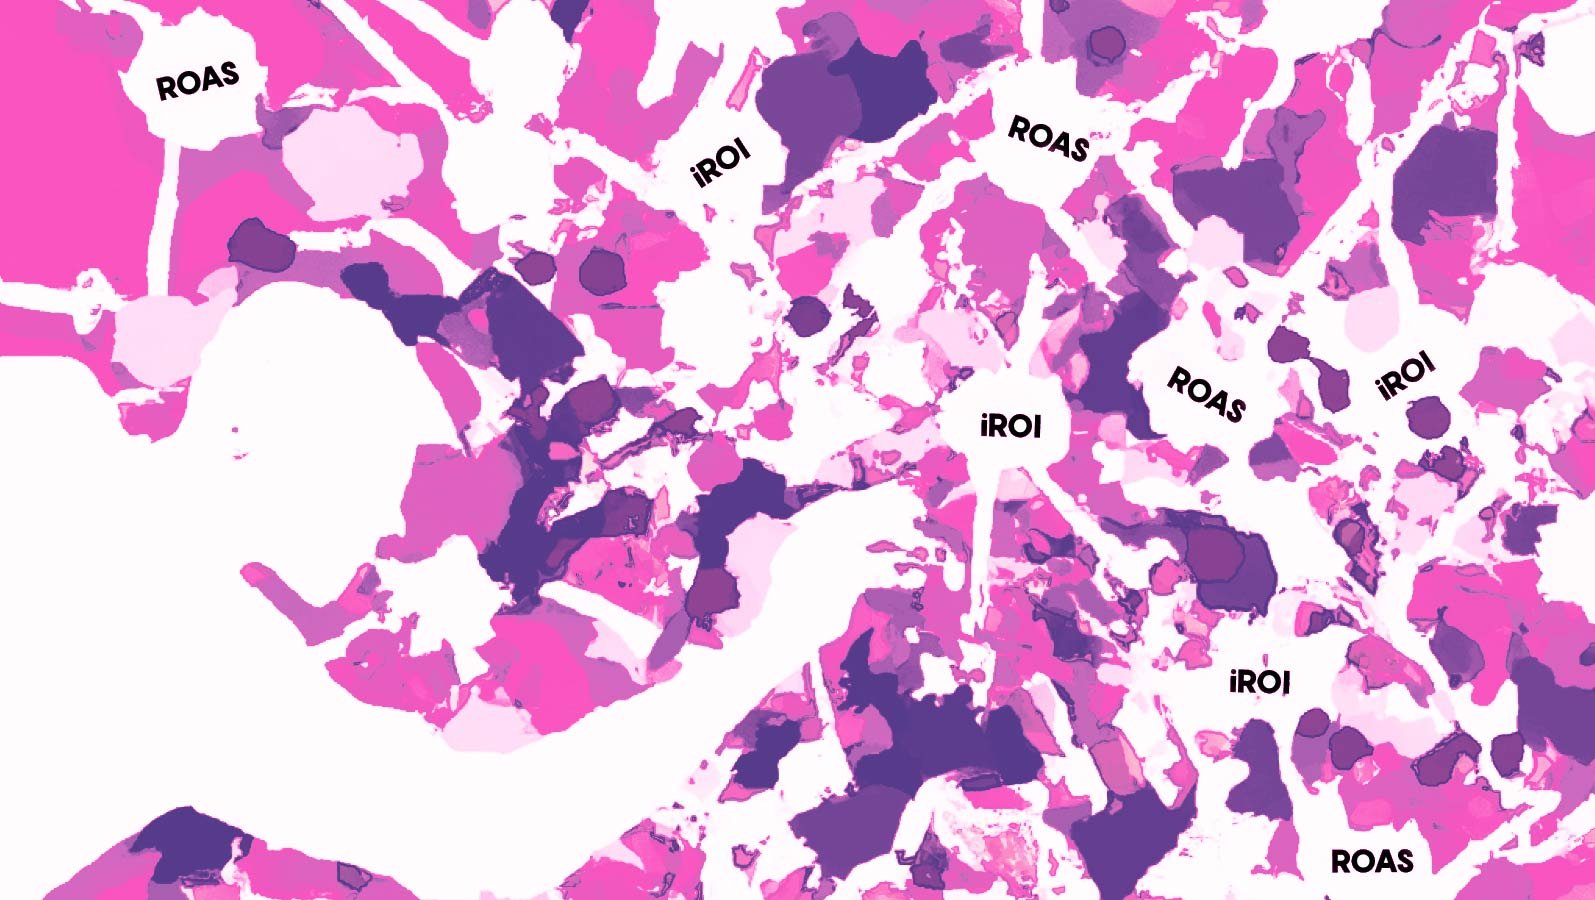 ROas and iROI have abstract relationship